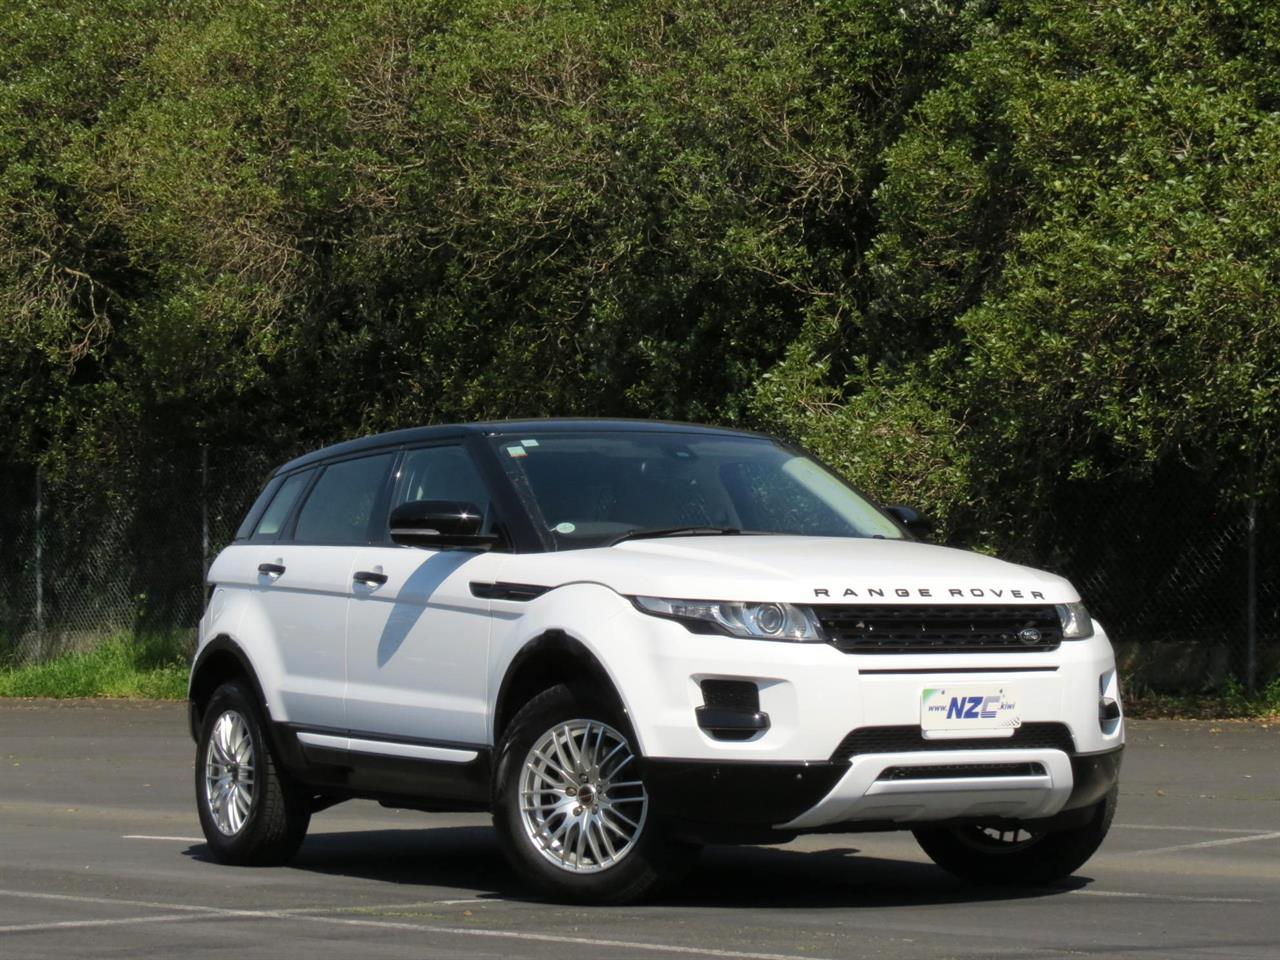 2013 Land Rover Range Rover Evoque 4WD + ONLY 52 KM'S + LEATHER